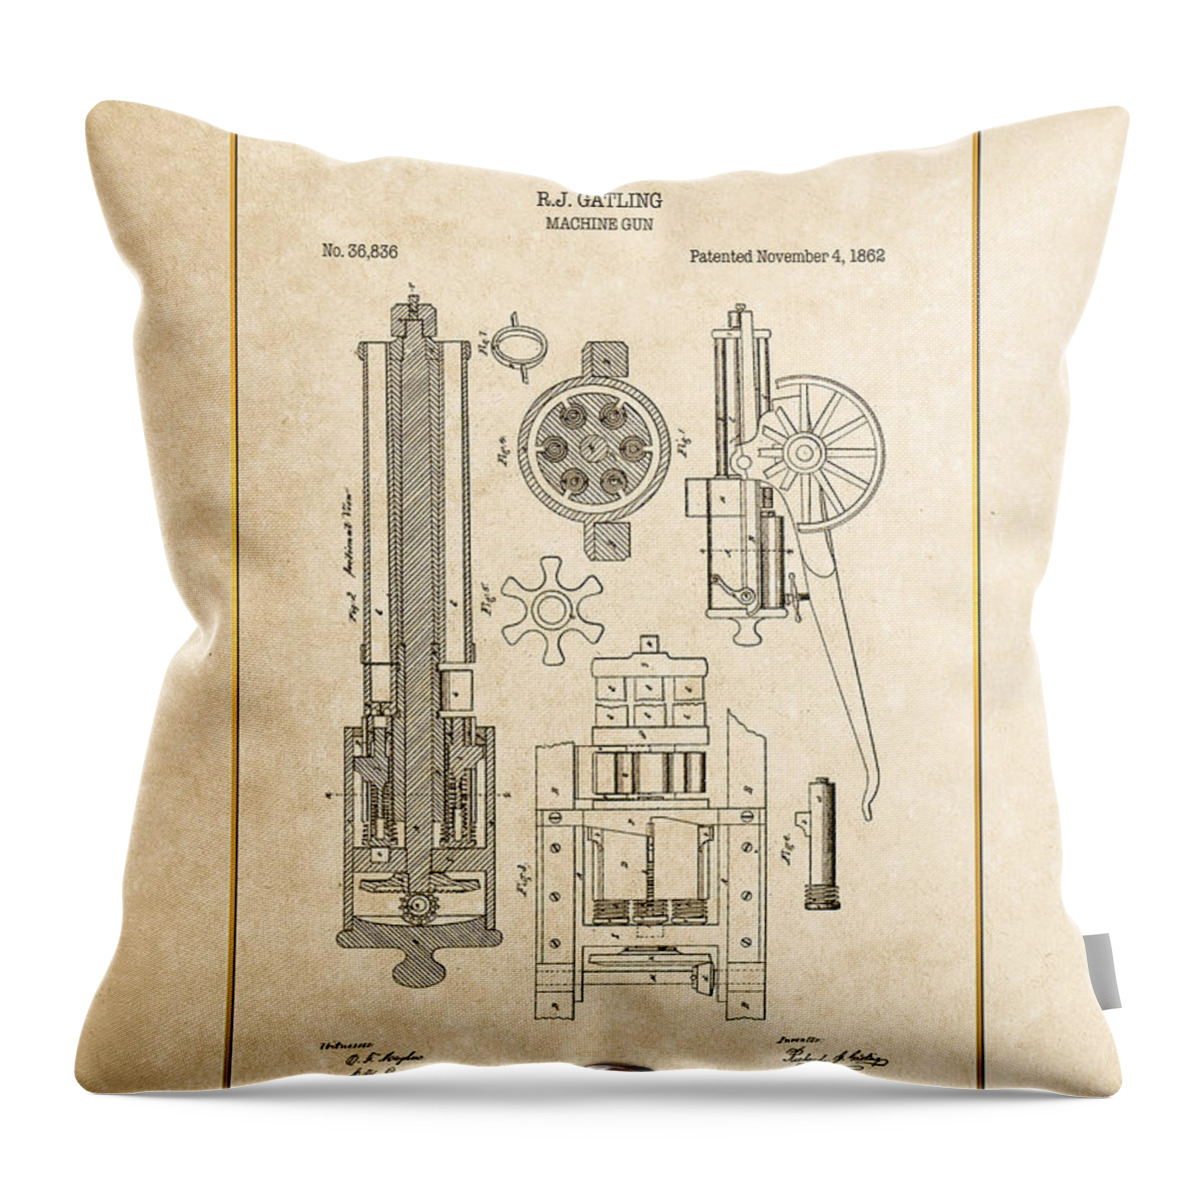 C7 Vintage Patents Weapons And Firearms Throw Pillow featuring the digital art Gatling Machine Gun - Vintage Patent Document by Serge Averbukh